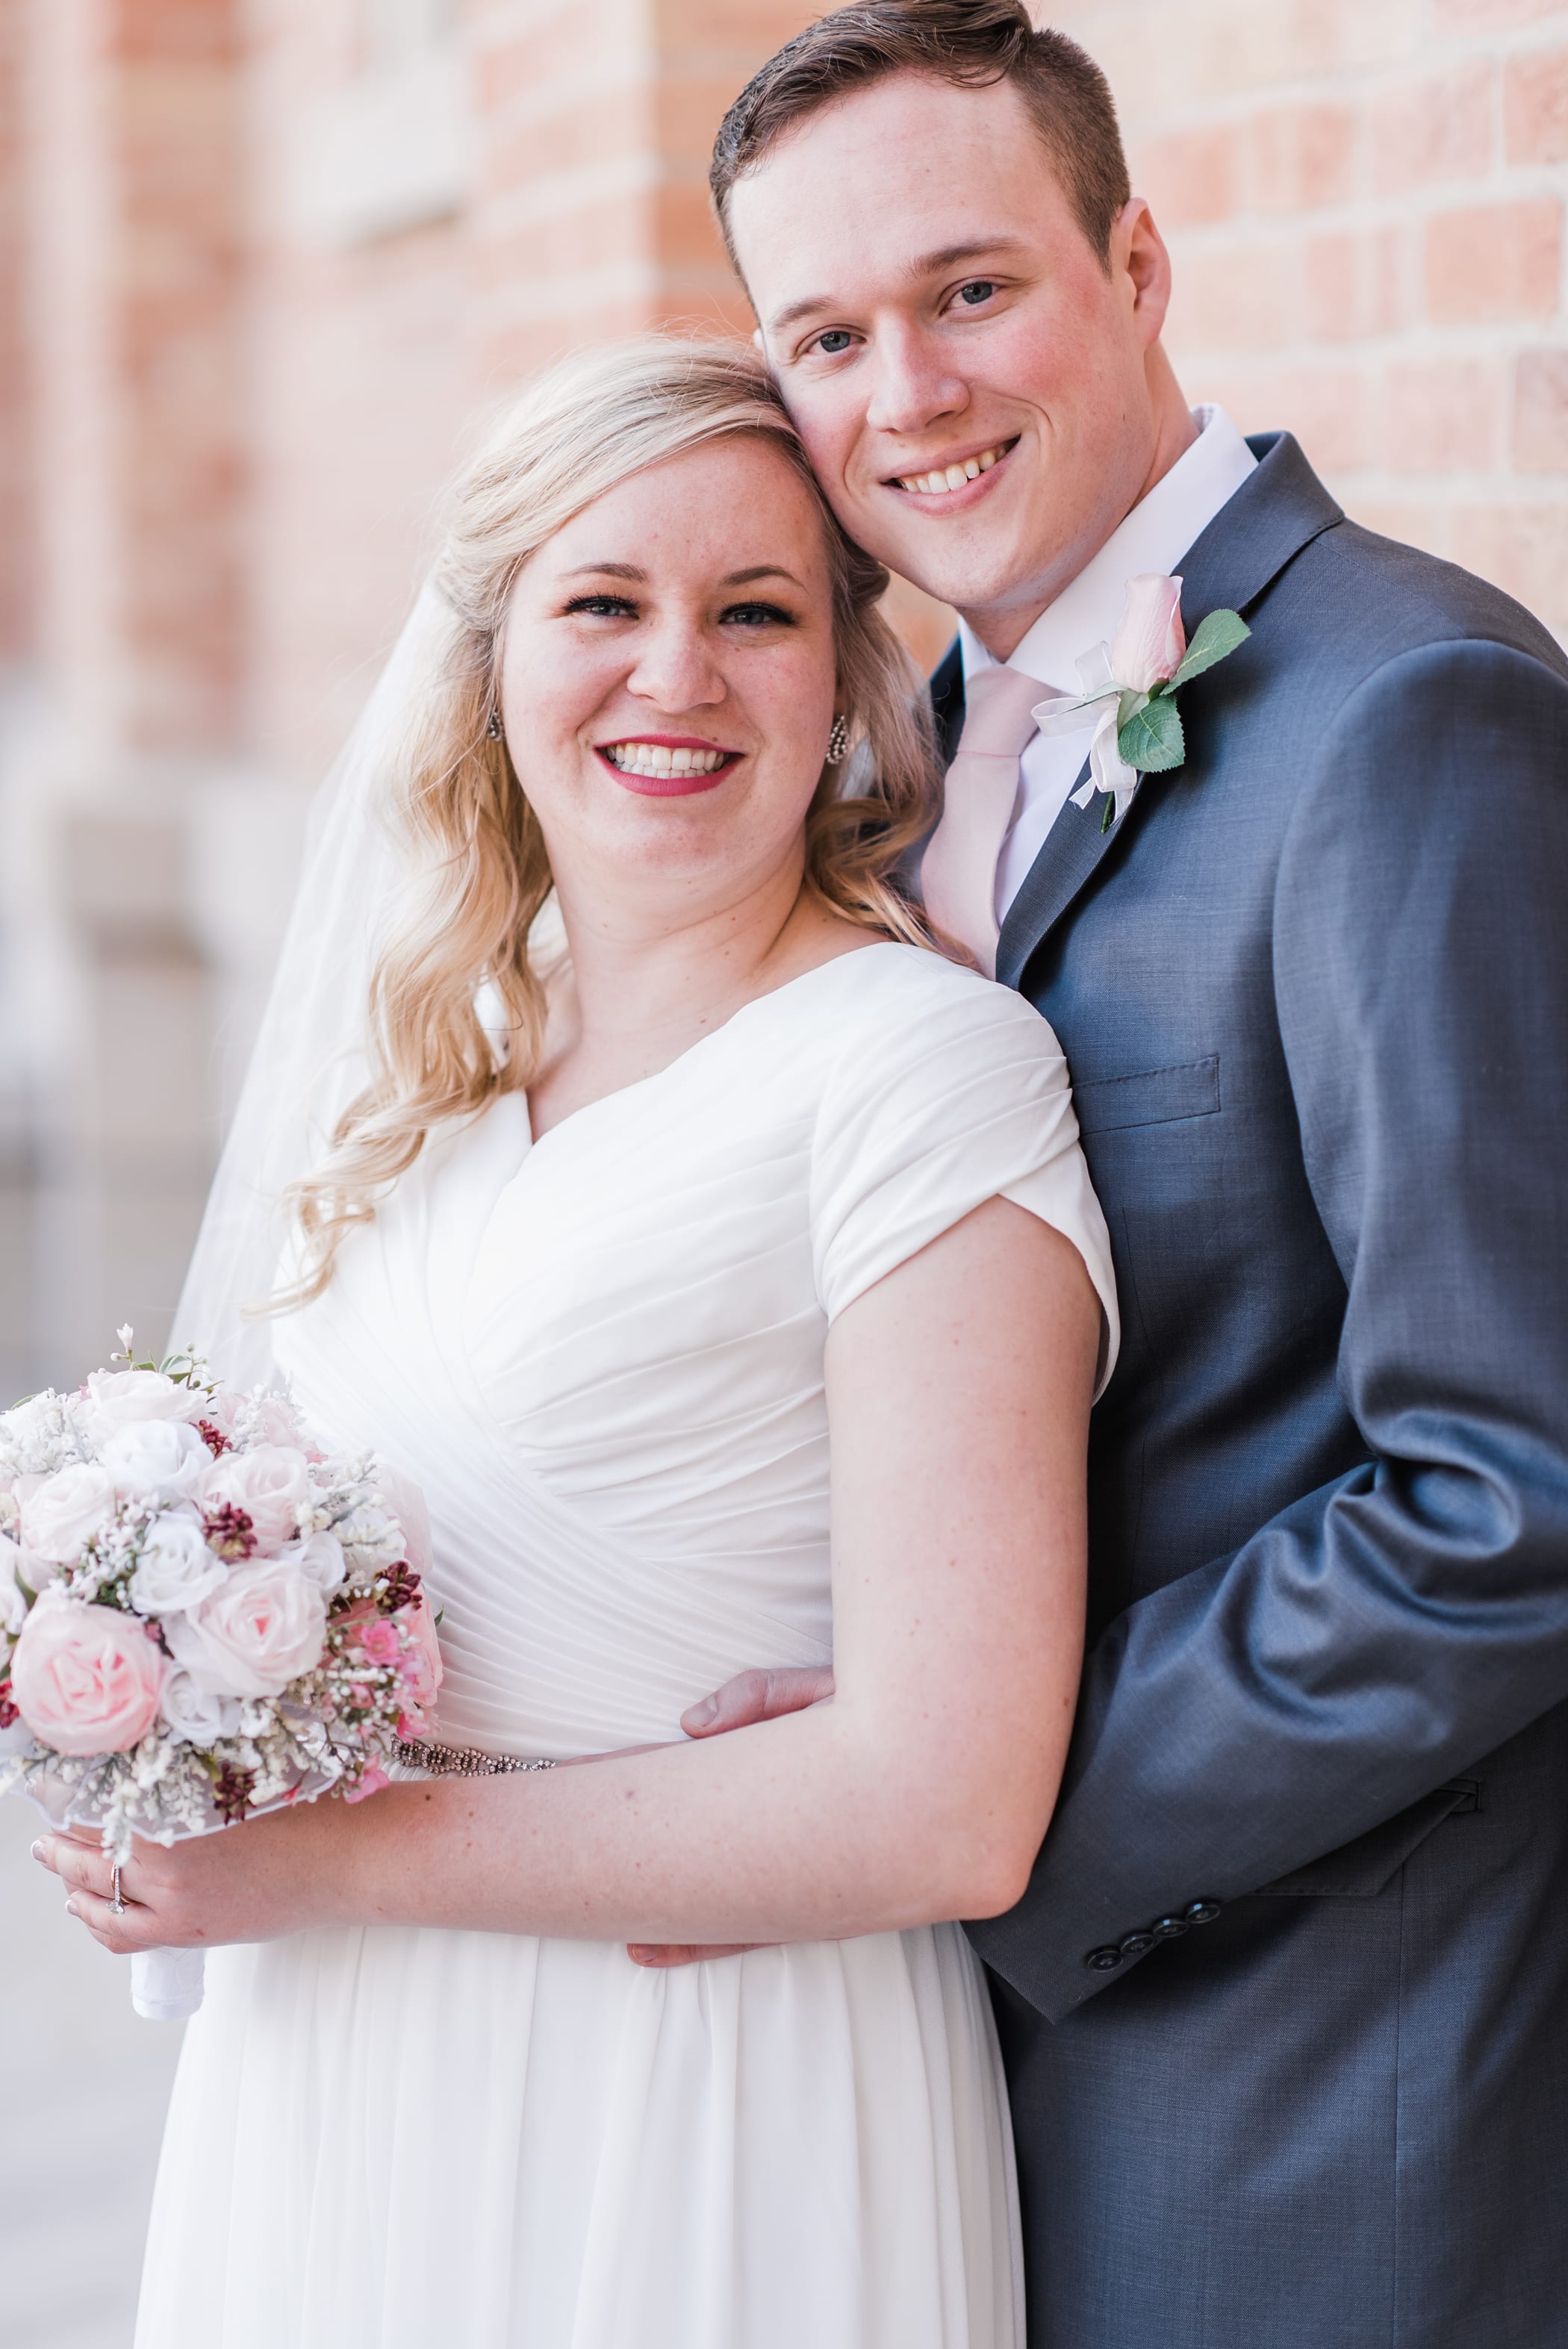 Provo City Center Temple Spring Wedding by Michelle & Logan